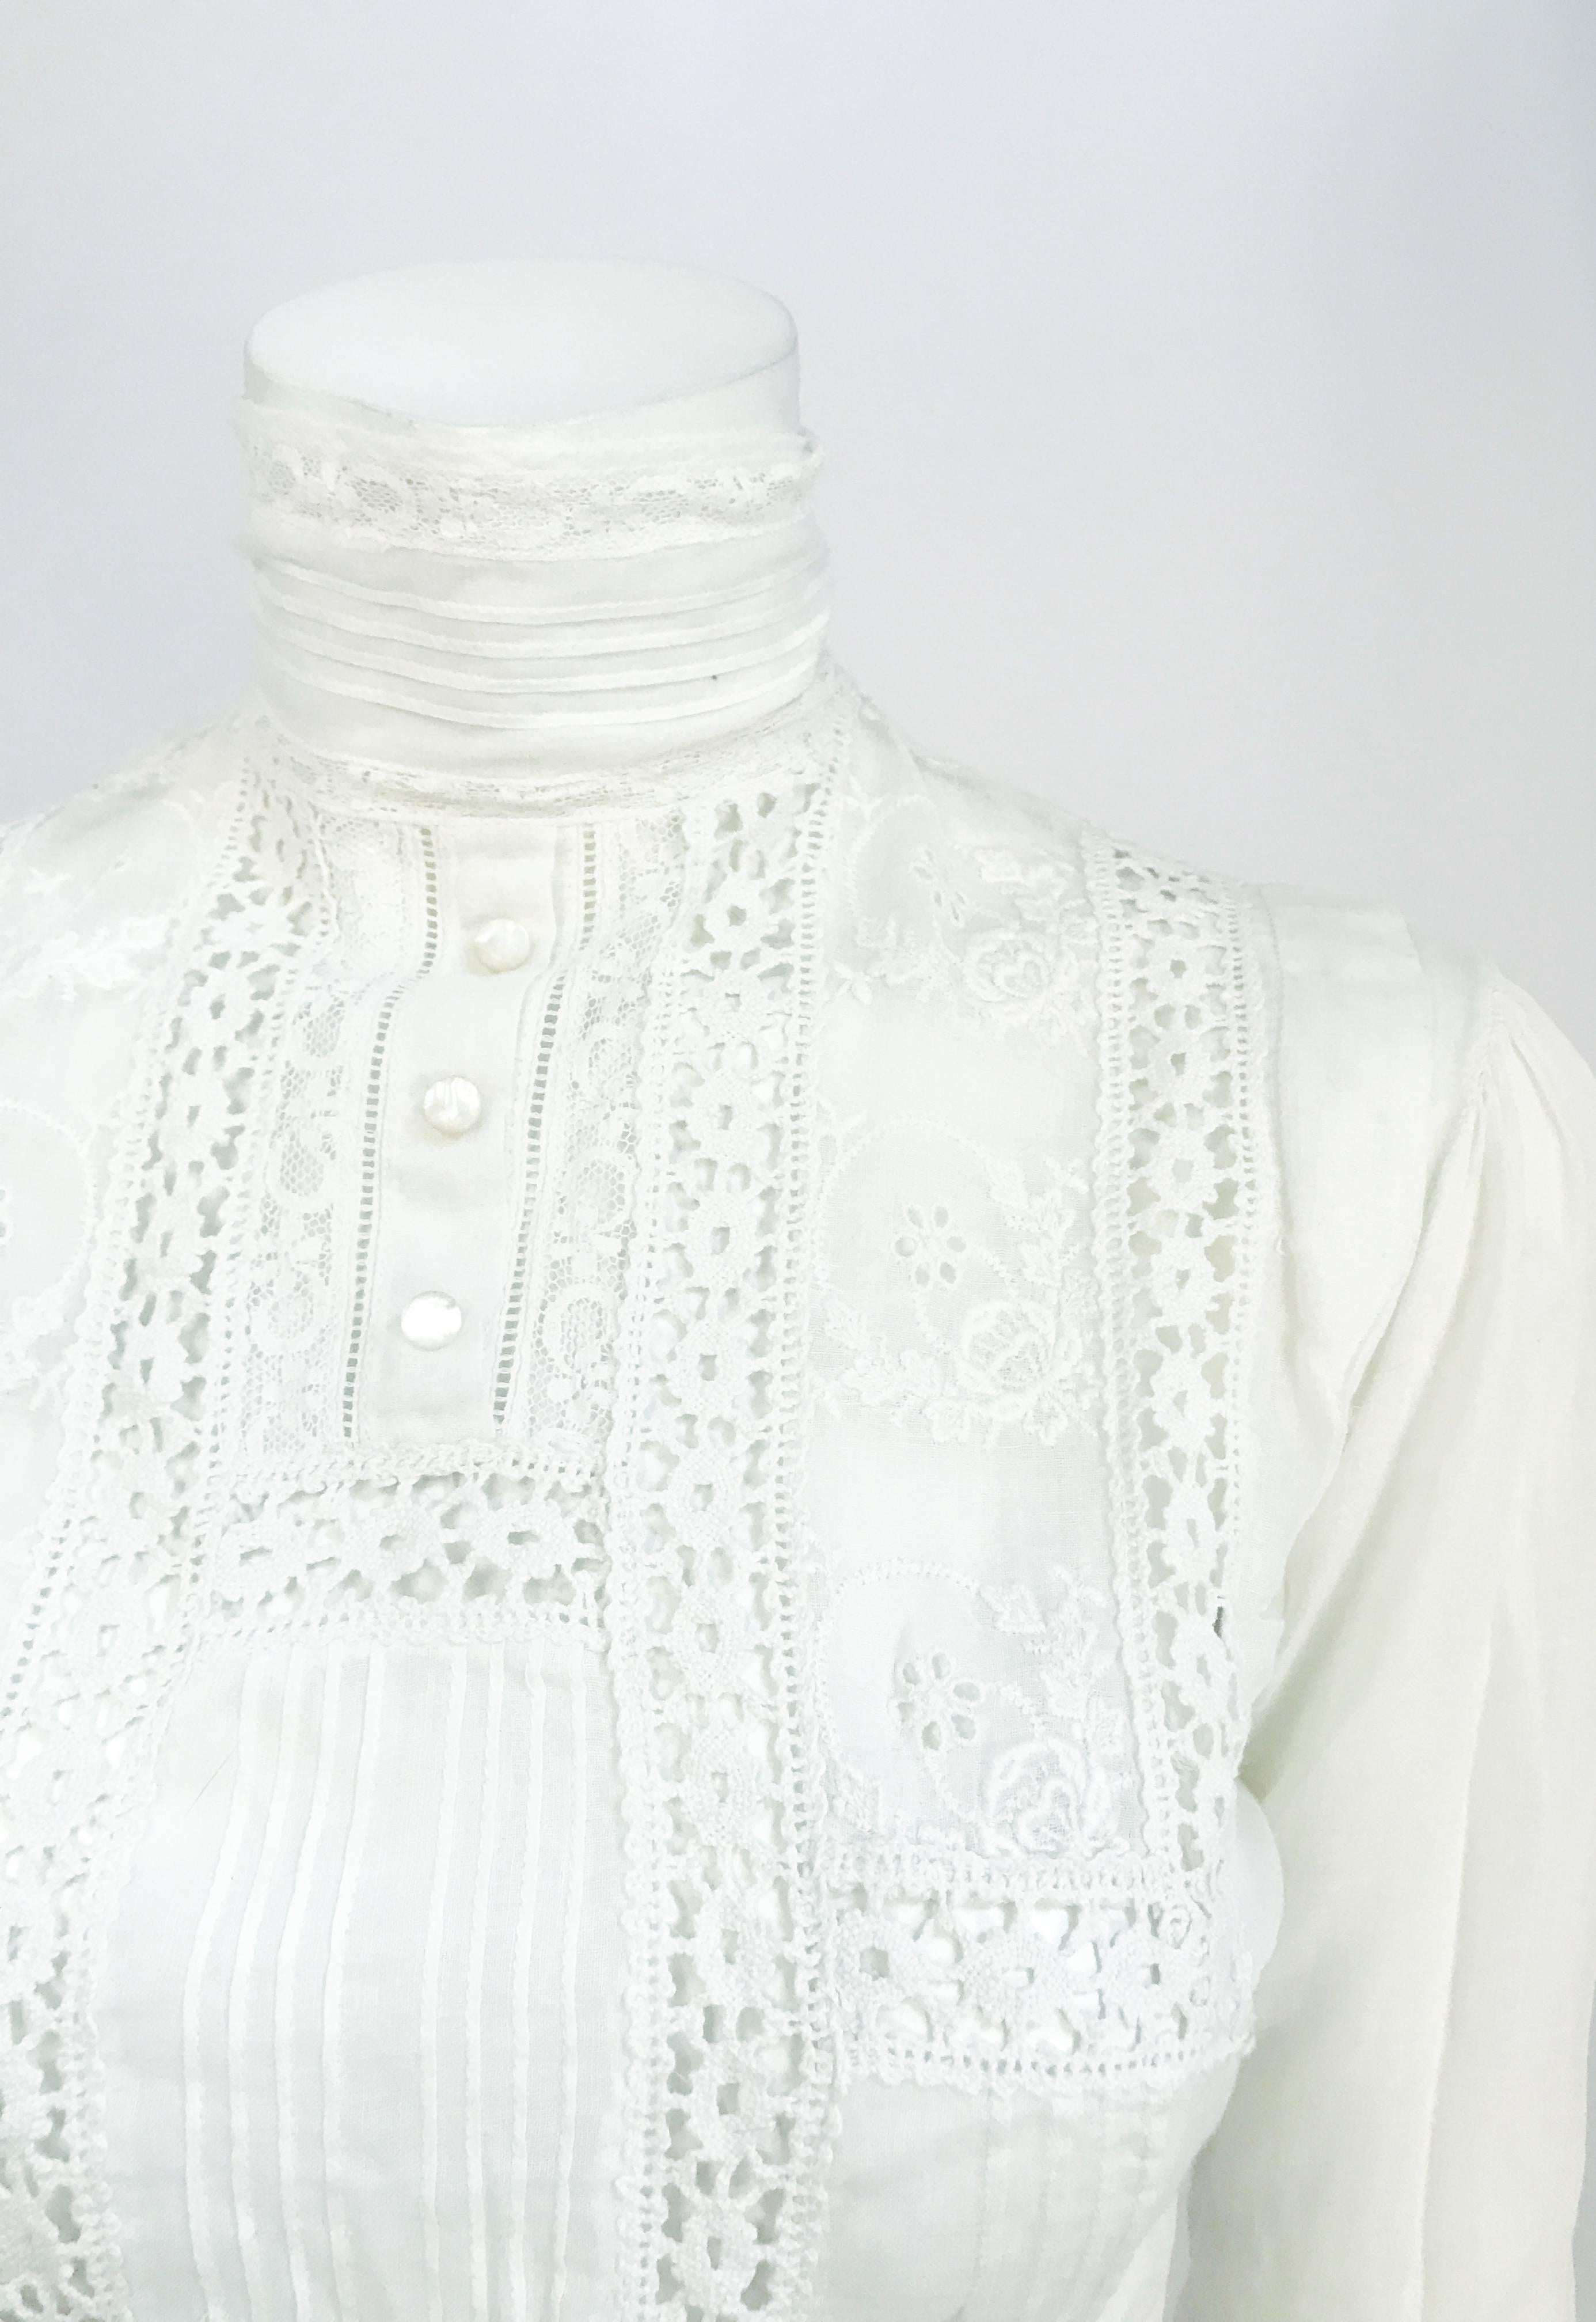 Edwardian White Cotton Long Sleeve Blouse. White cotton blouse with long sleeves, modified bidgeon chest, pleats, and lace trims. High-necked collar and shell buttons up the back 